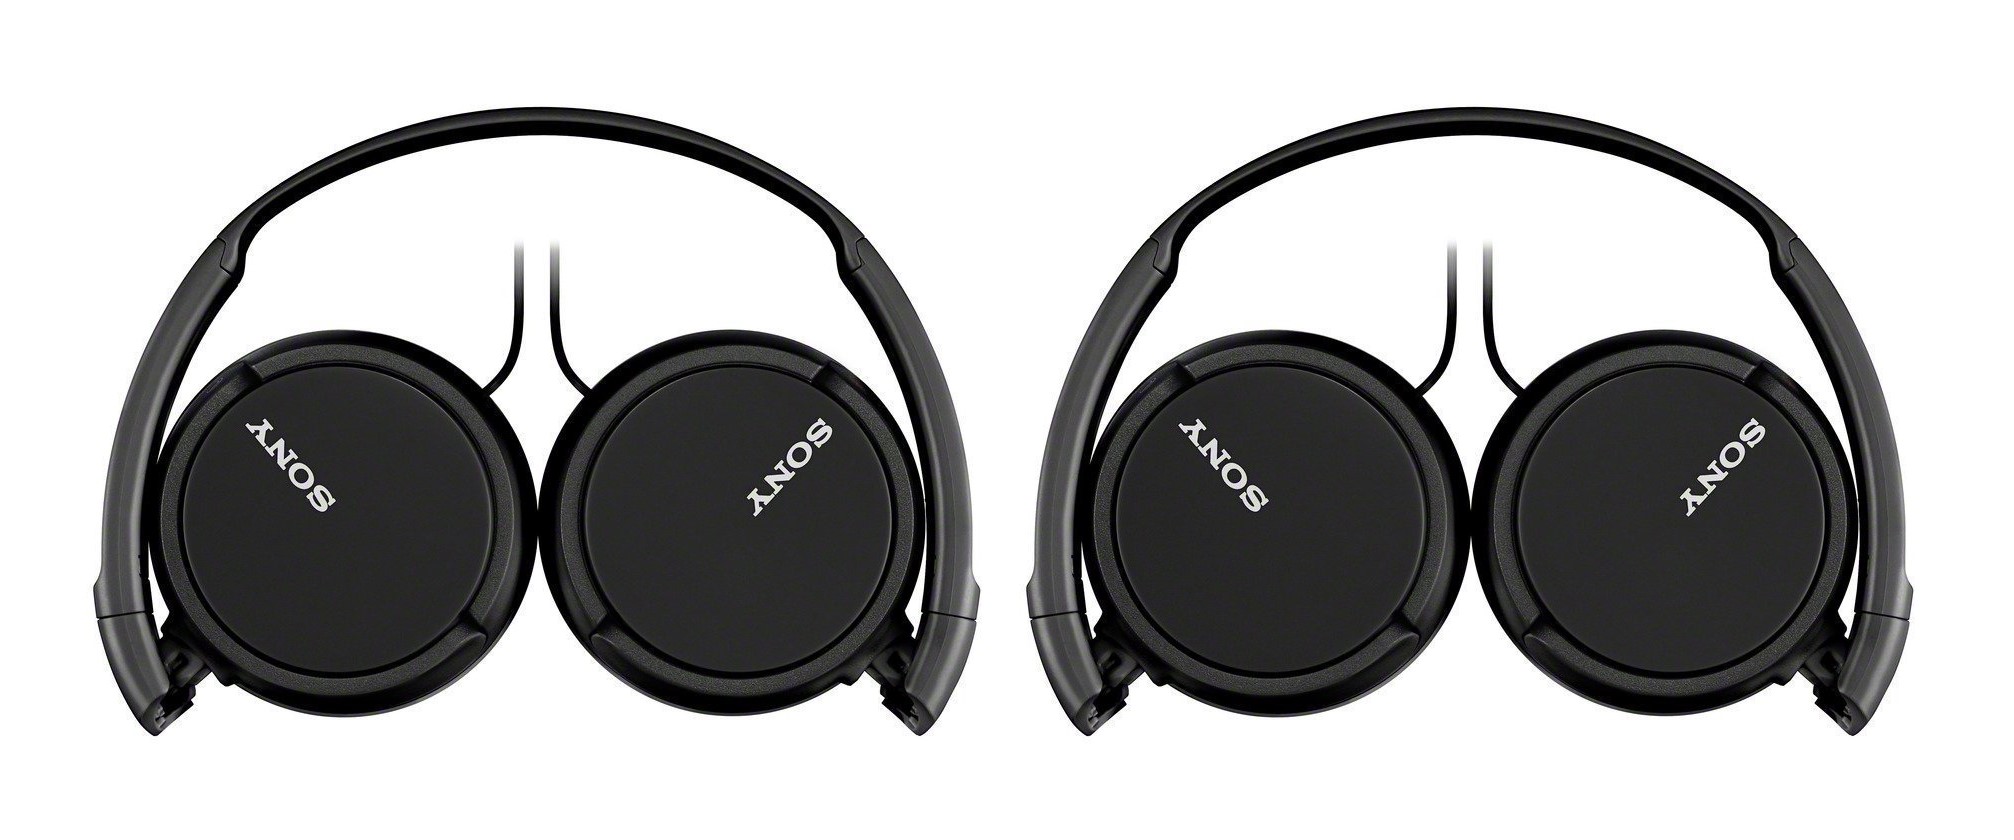 2-PACK Sony MDR-ZX110AP Extra Bass Wired Headphones with Microphone, Smartphone Headset for iPhone & Android with In-Line Remote & Microphone, 30mm Drivers, Black (Refurbished)